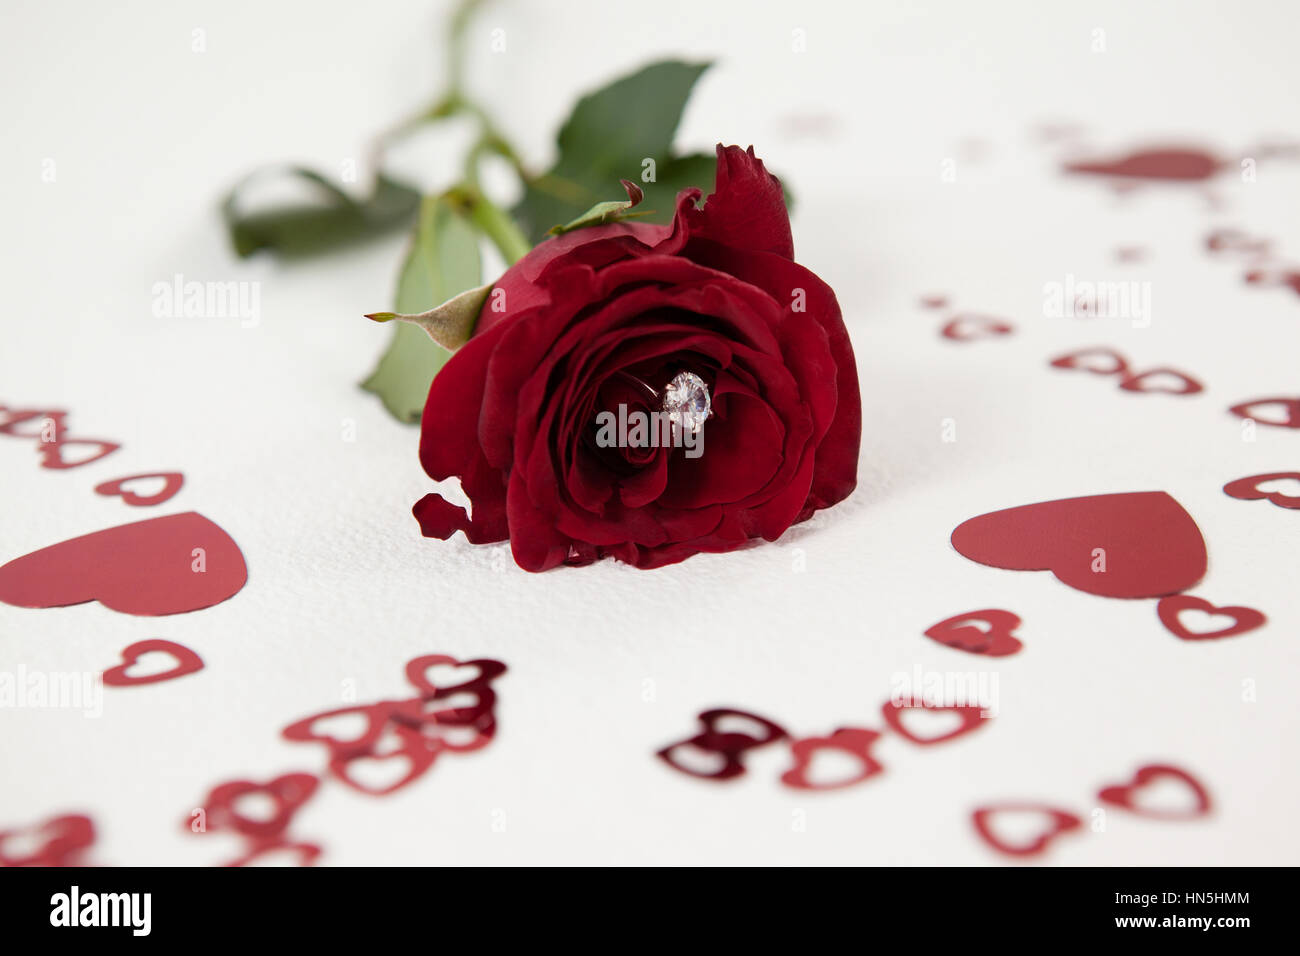 Close-up of red rose with a diamond ring surrounded by heart-shaped decoration Stock Photo